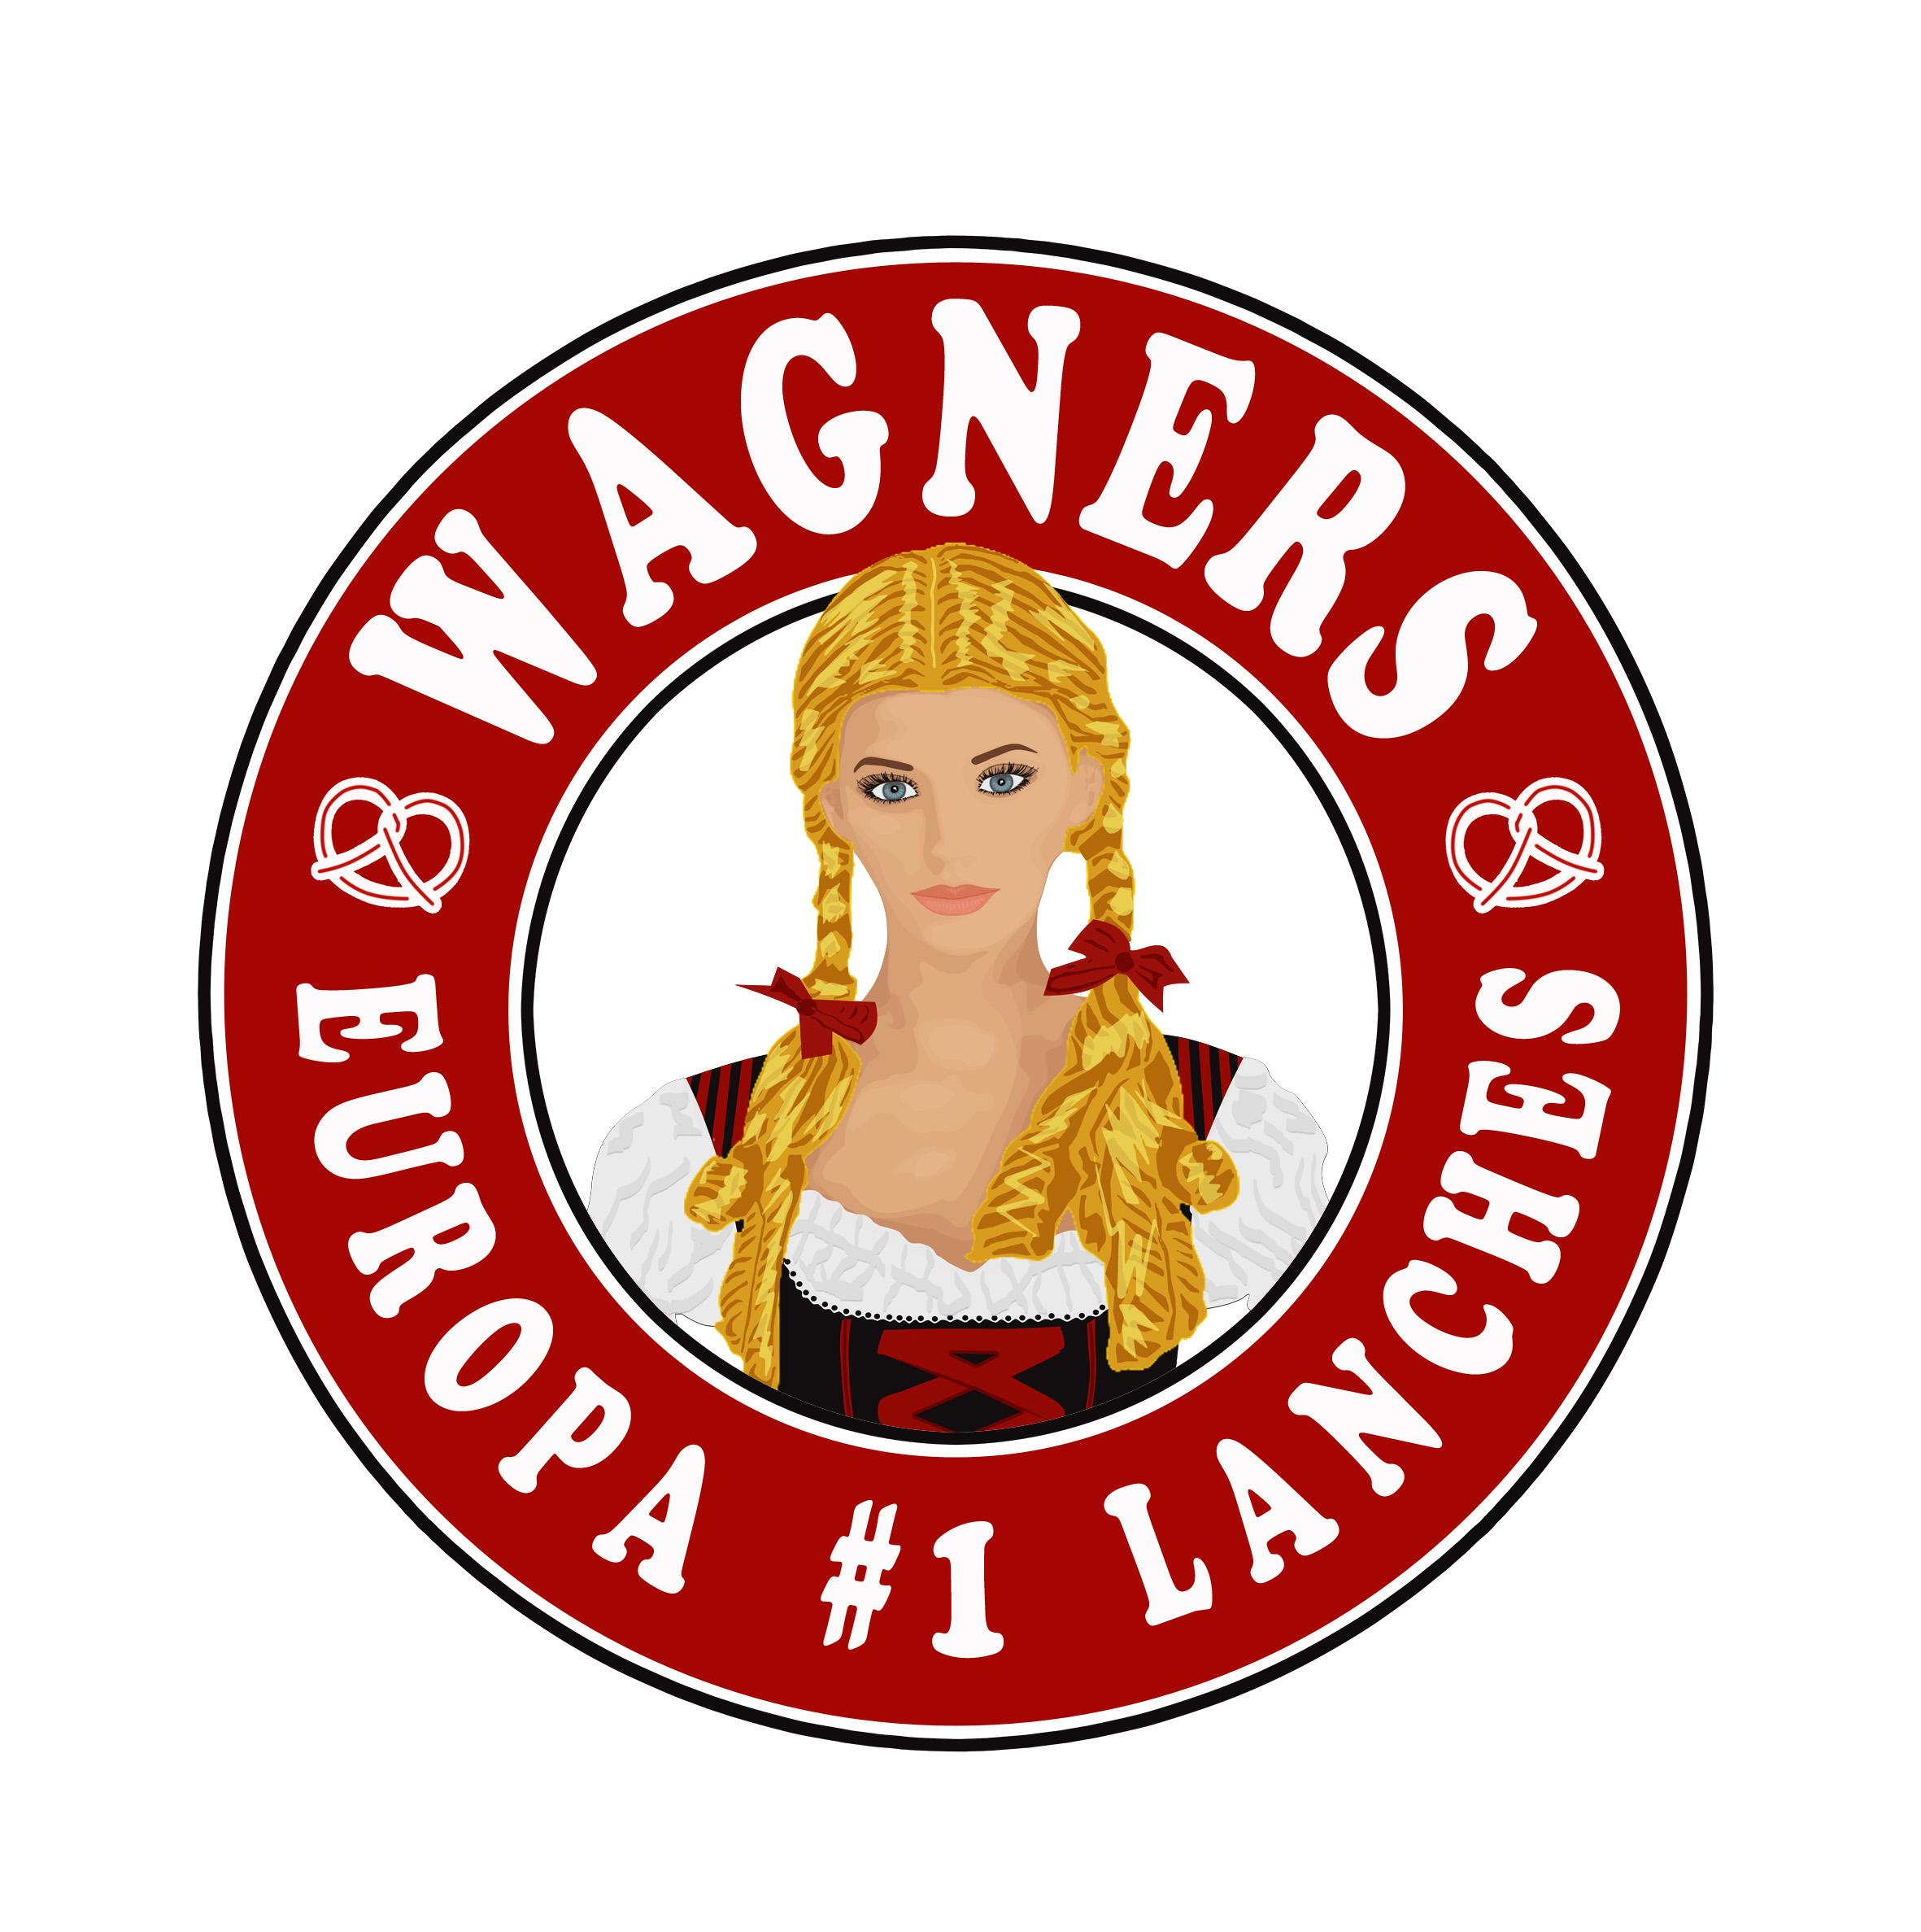 Wagner Lanches logo